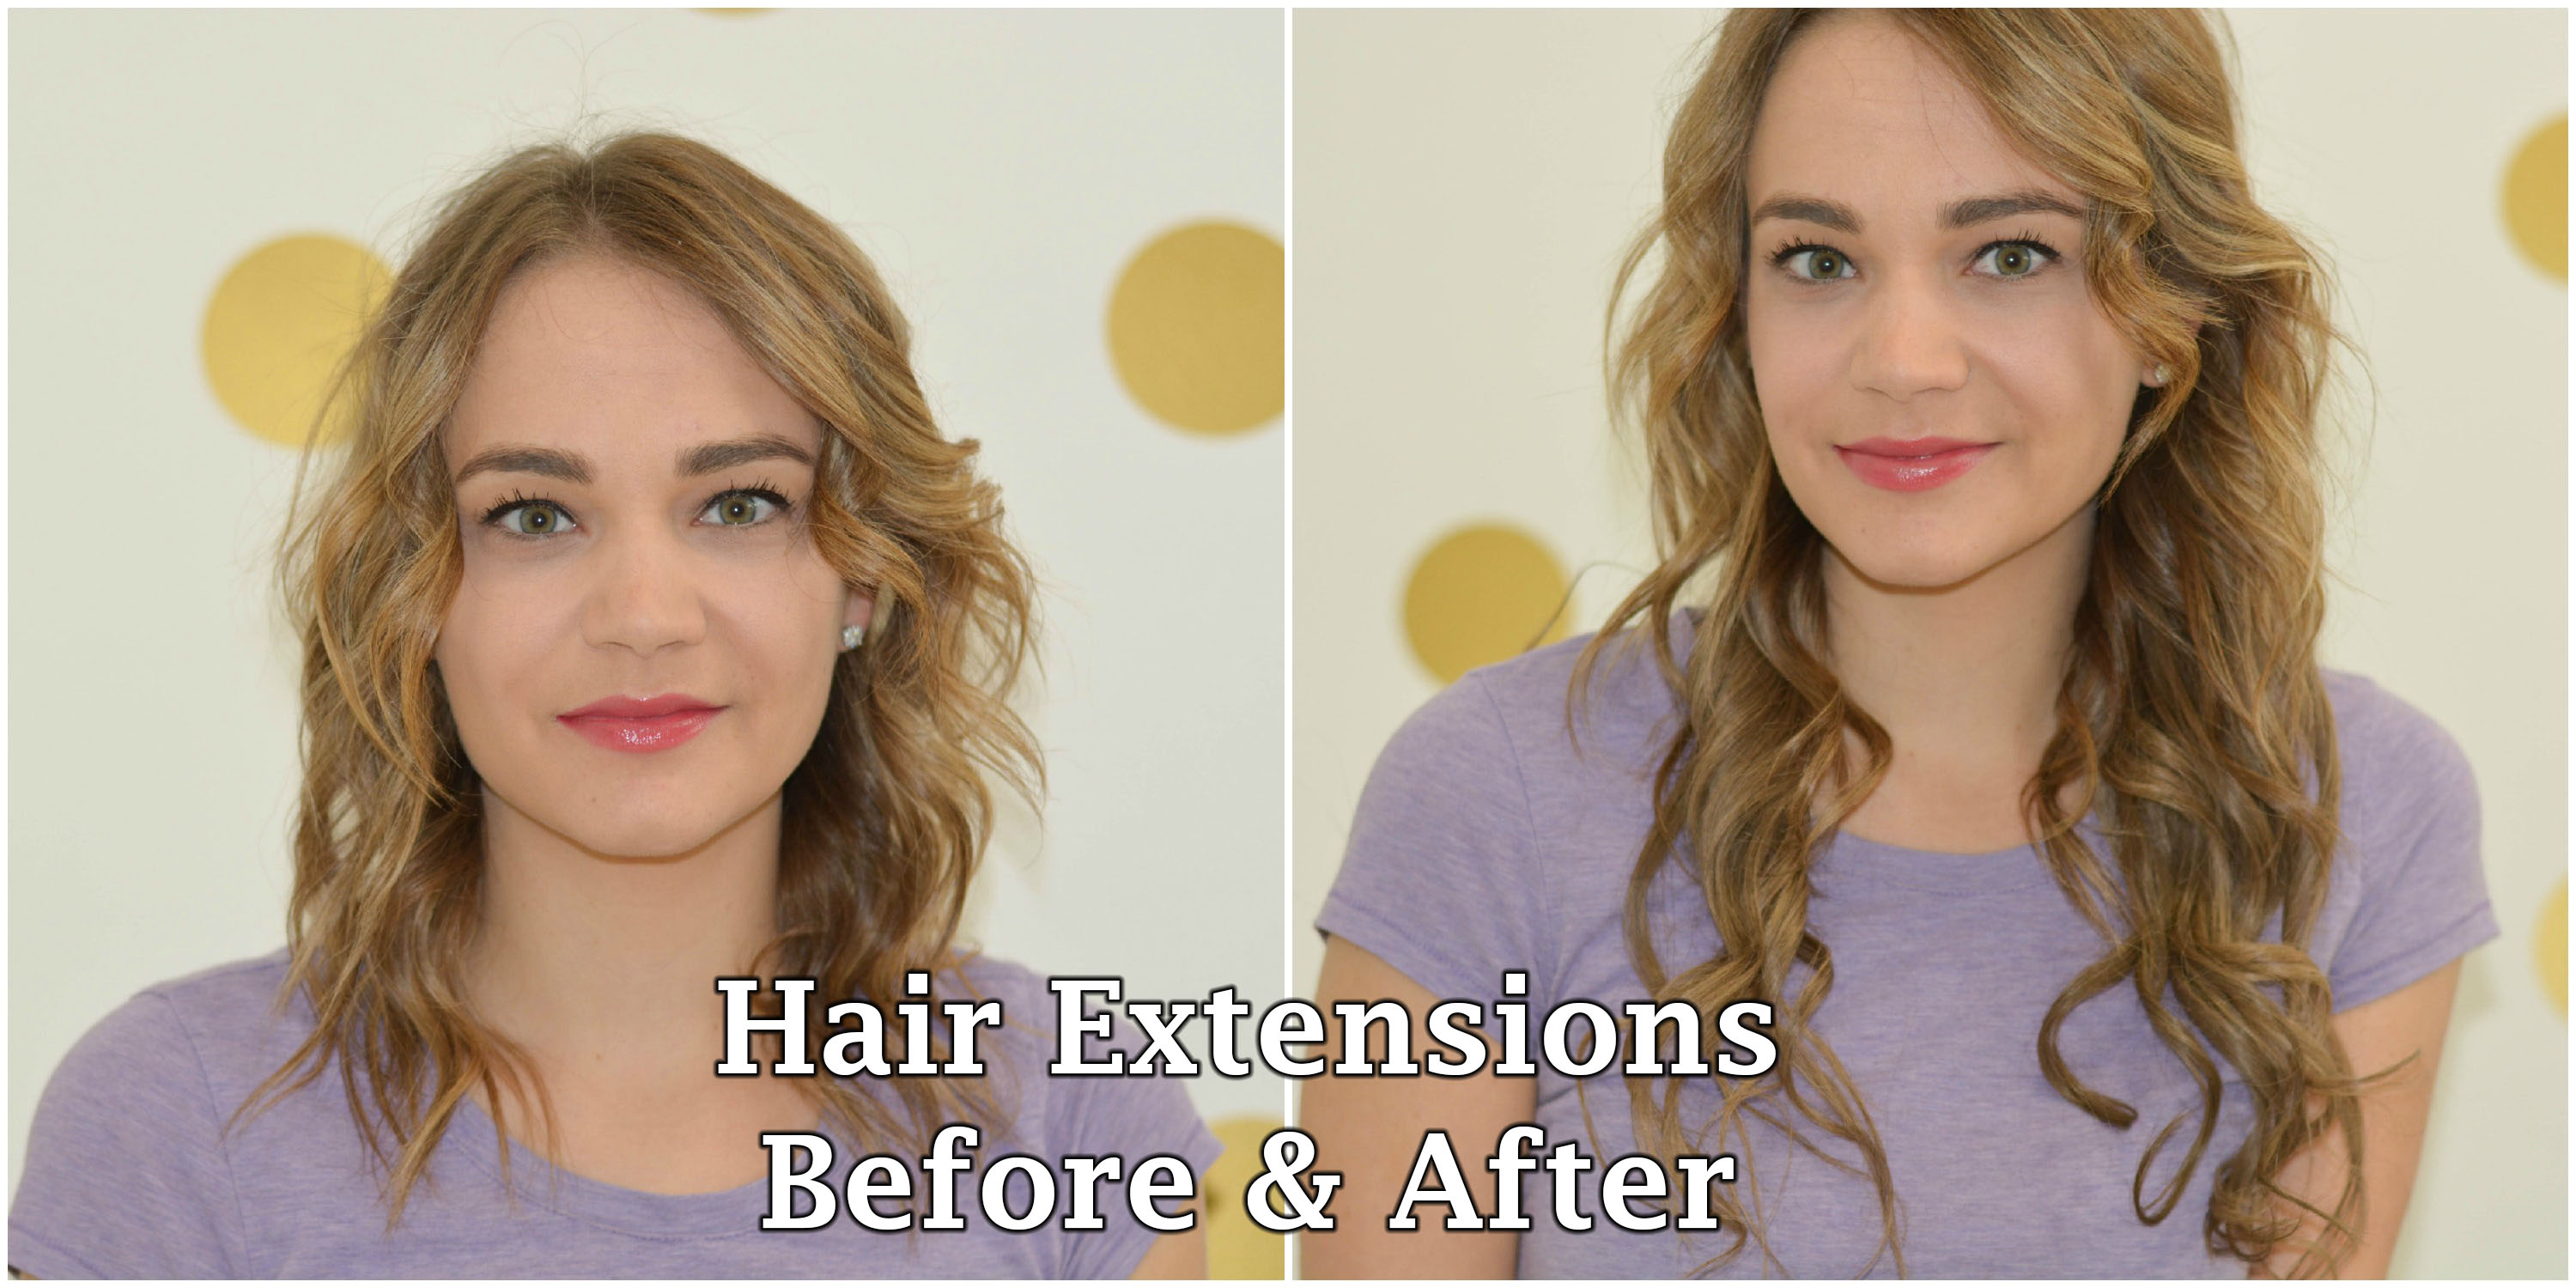 How to Wear Hair Extensions